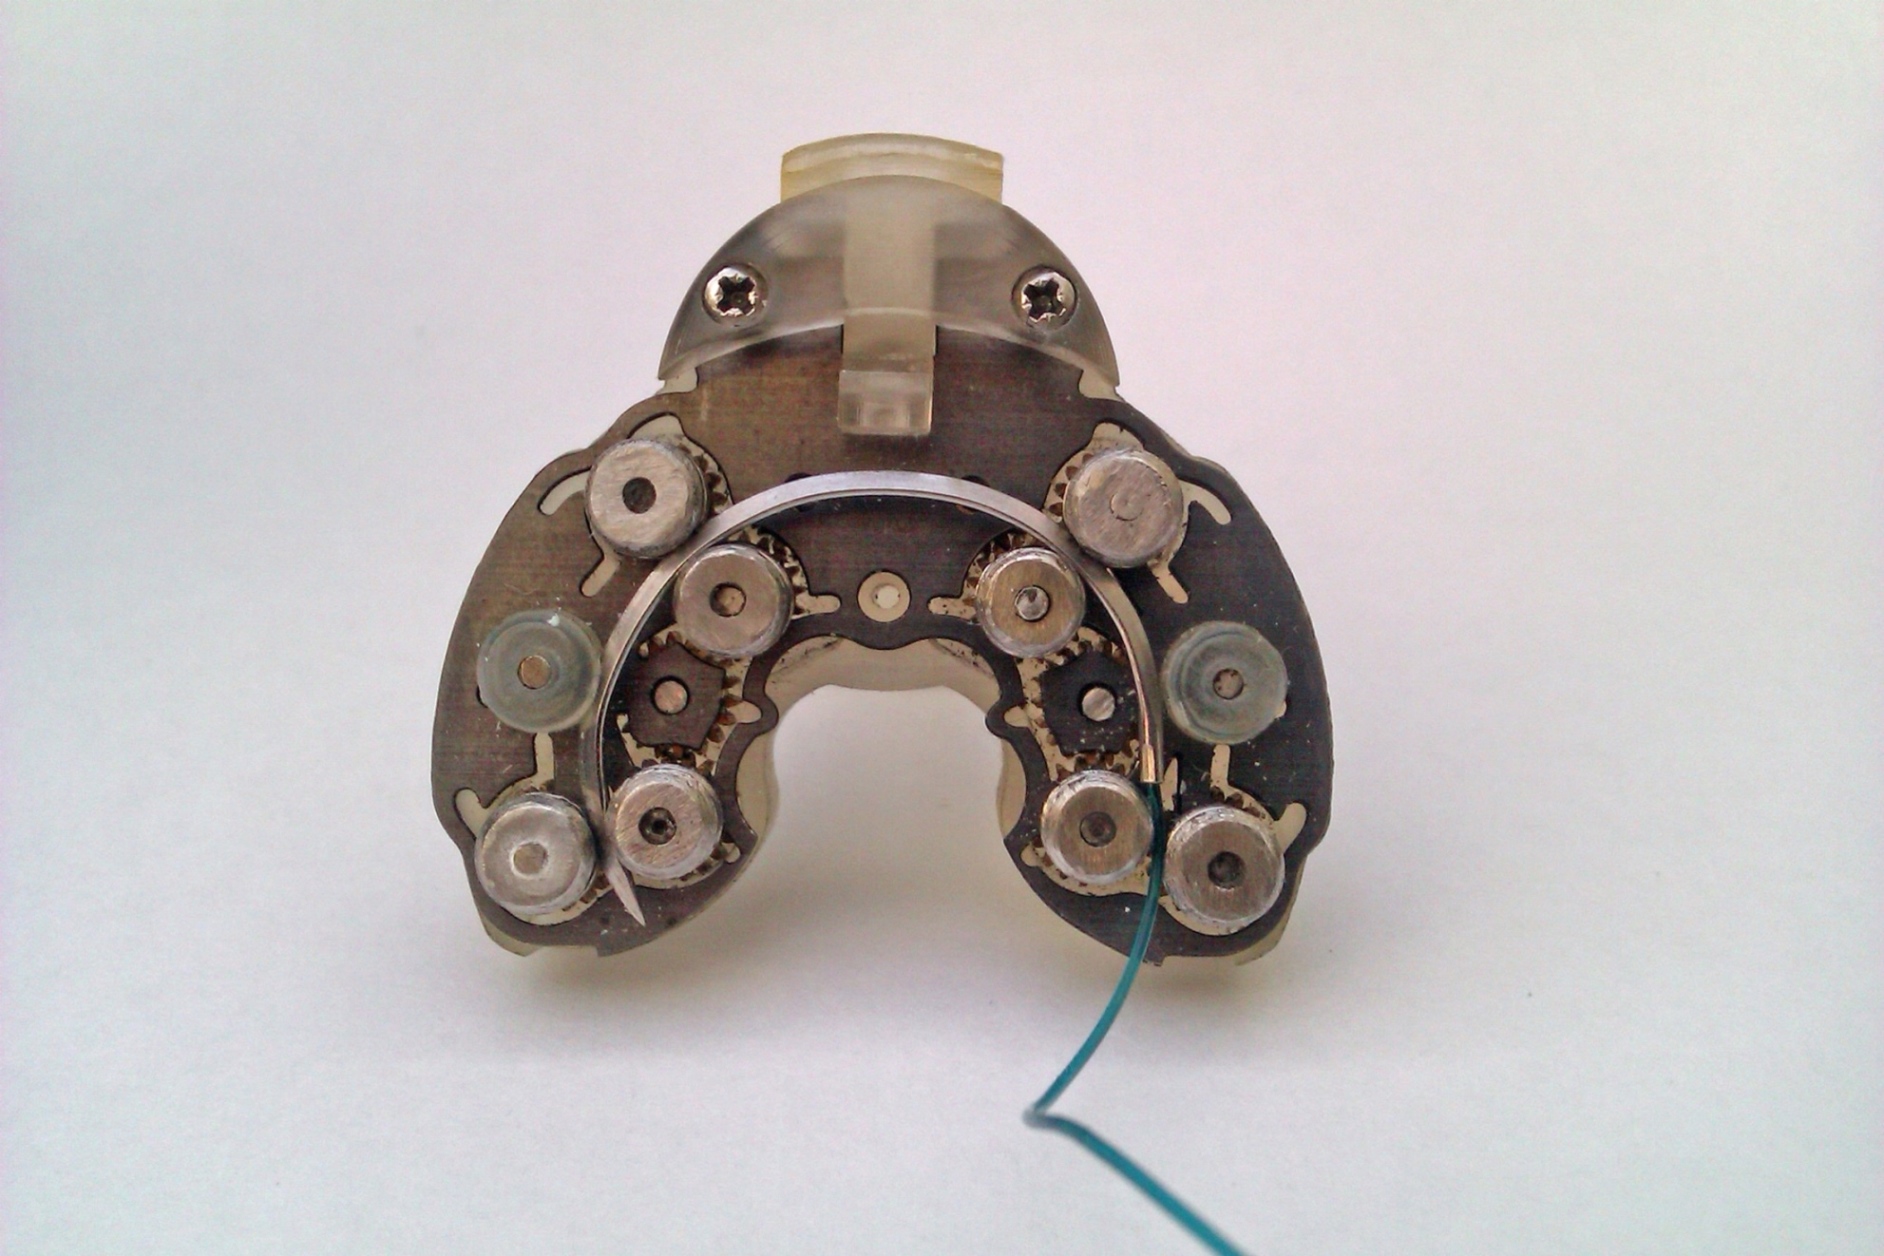 Automated suturing device from Sutrue, with 3D printed internal gears by Concept Laser. Photo via Concept Laser